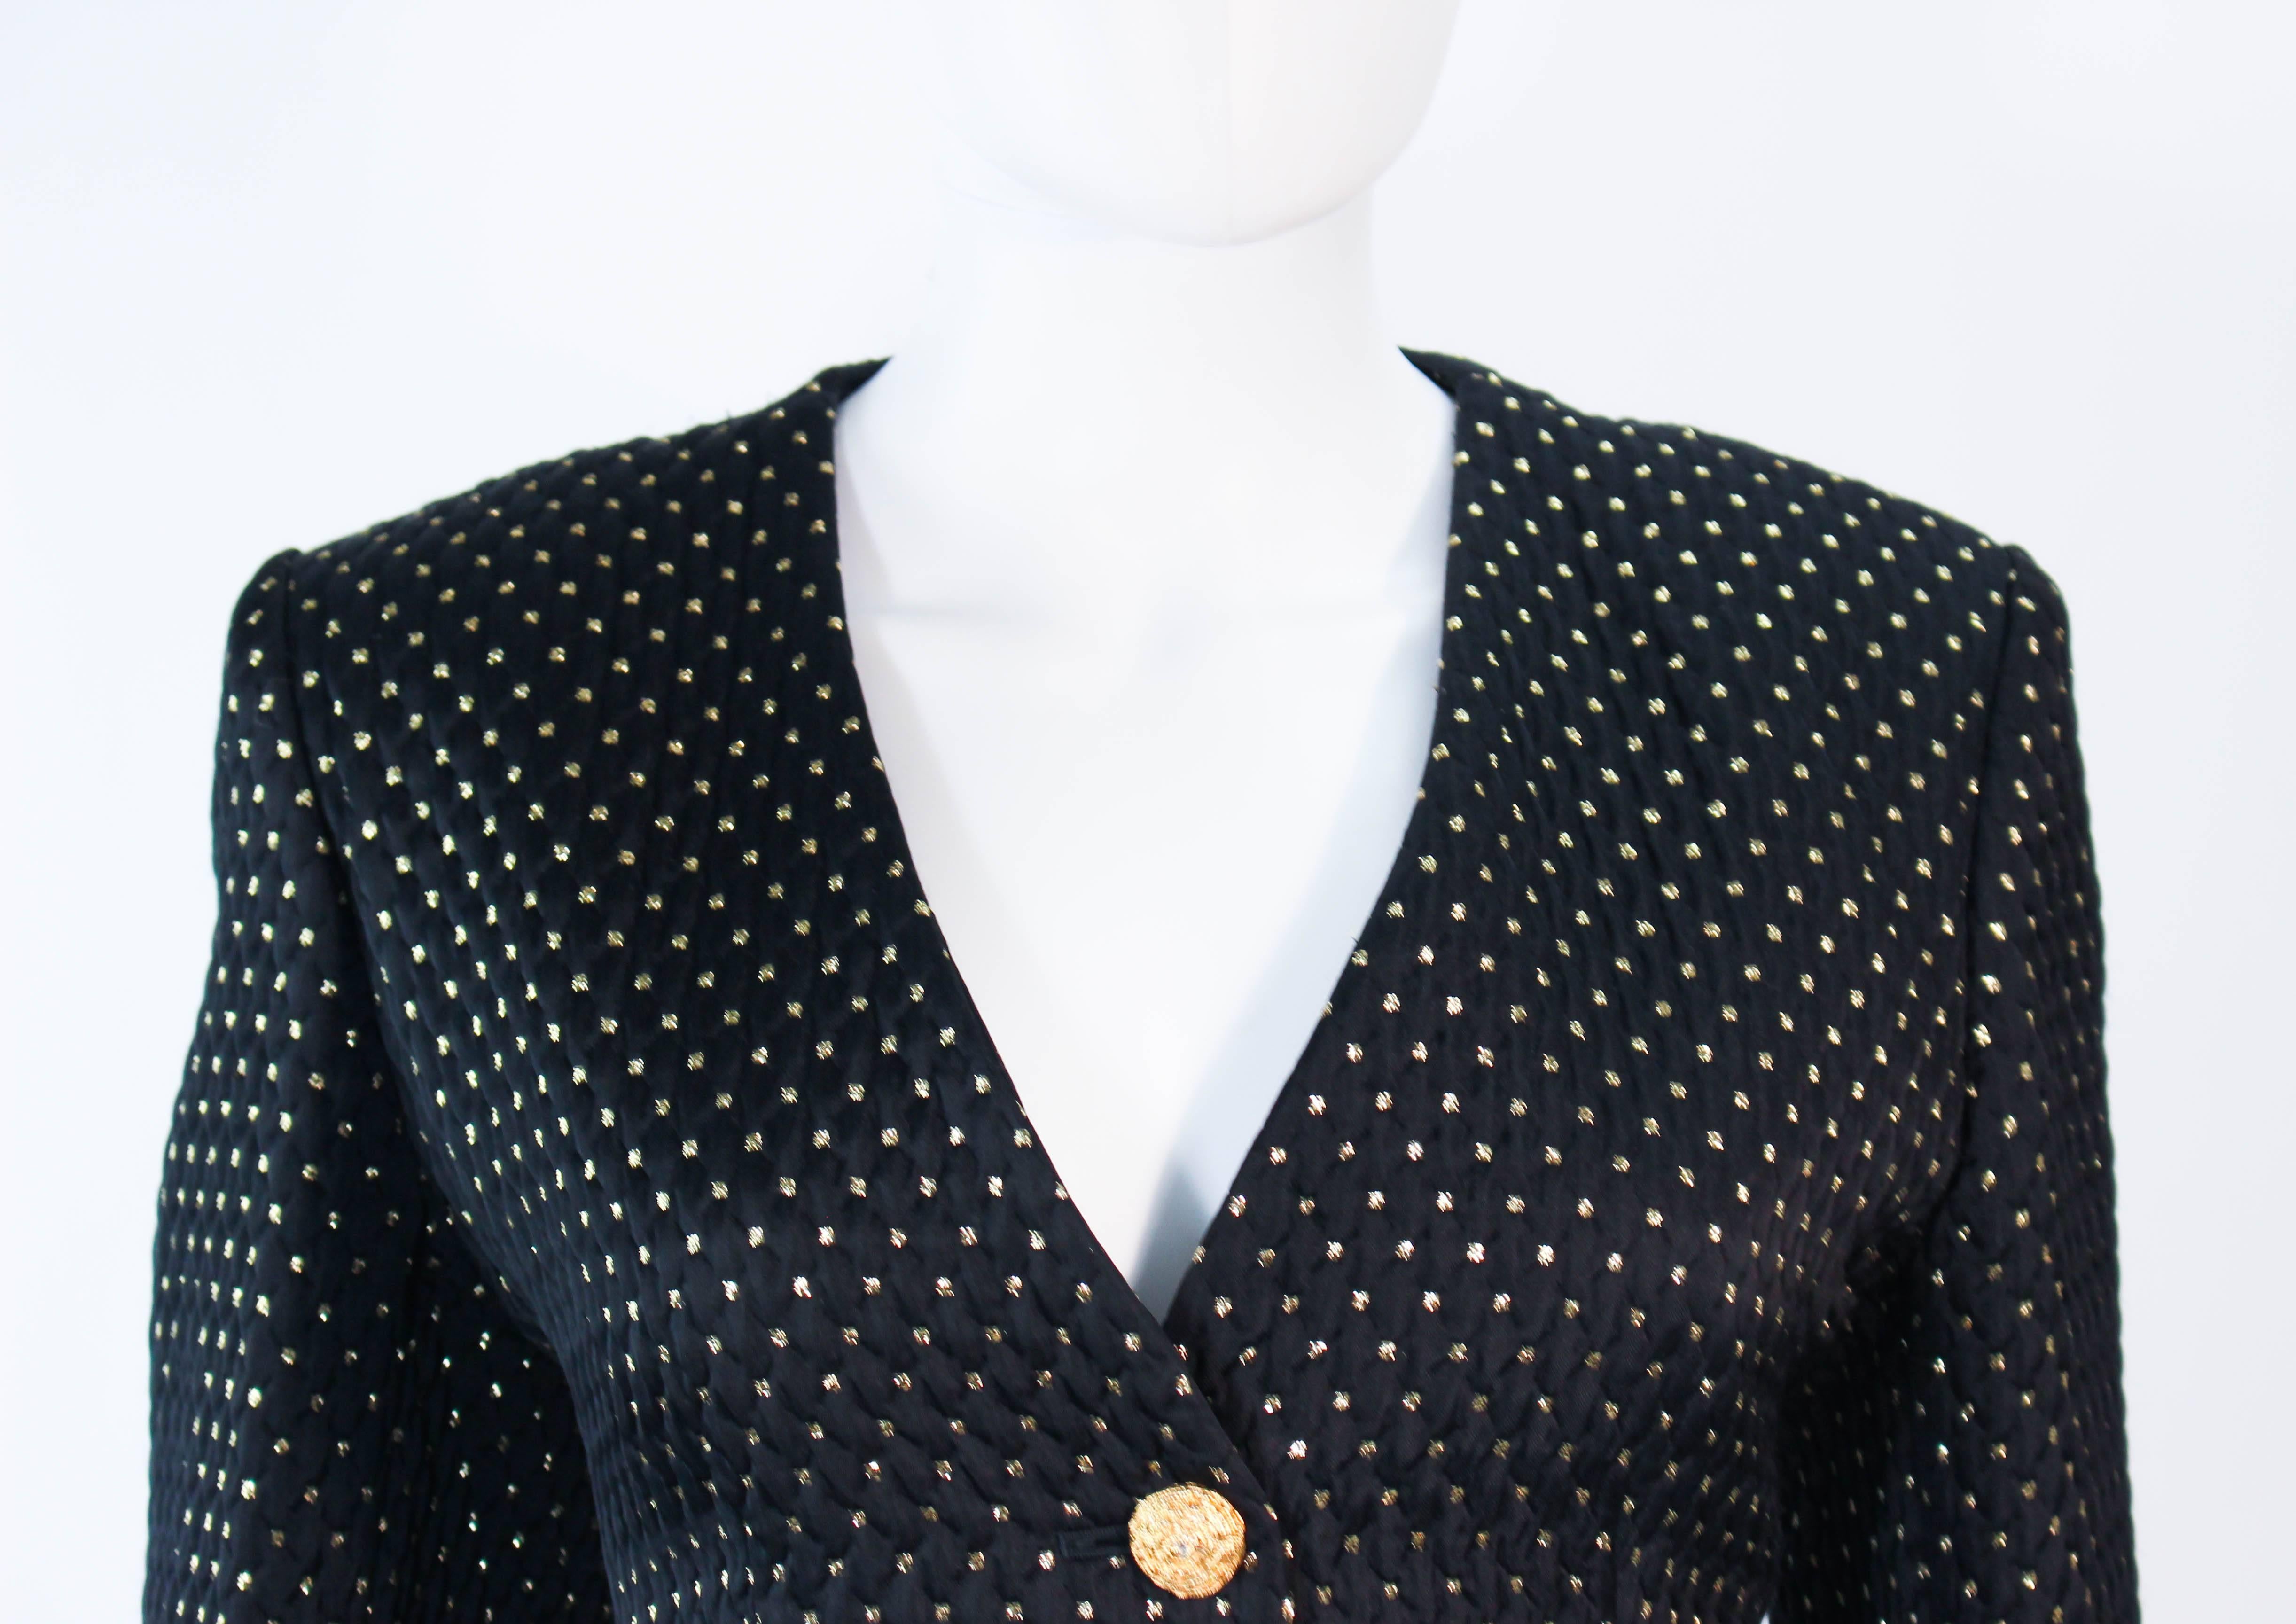 YVES SAINT LAURENT Vintage Black and Gold Metallic Jacket Size 42 10 In Excellent Condition For Sale In Los Angeles, CA